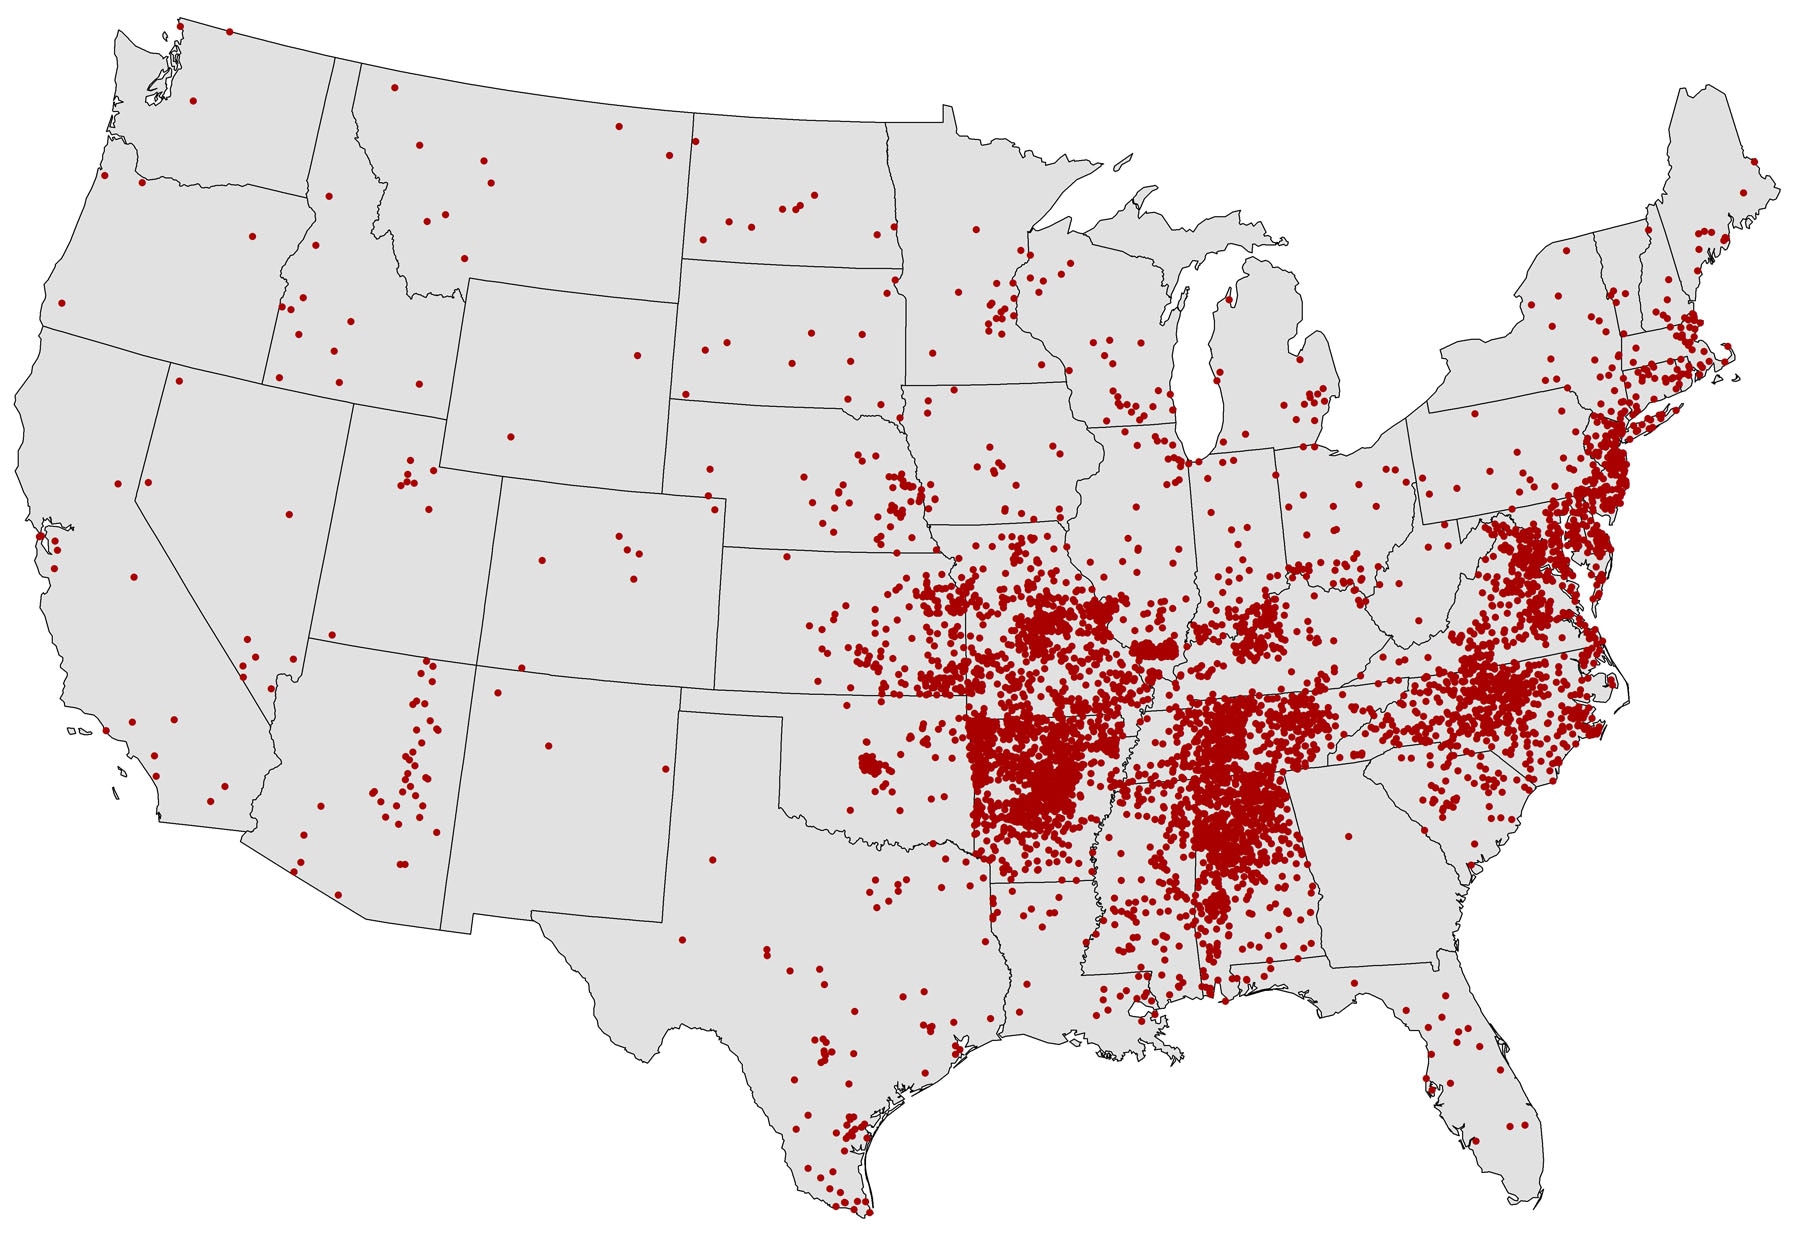 US map showing where Spotted Fever Rickettsiosis cases have been reported. Cases concentrated in the Eastern half of the US